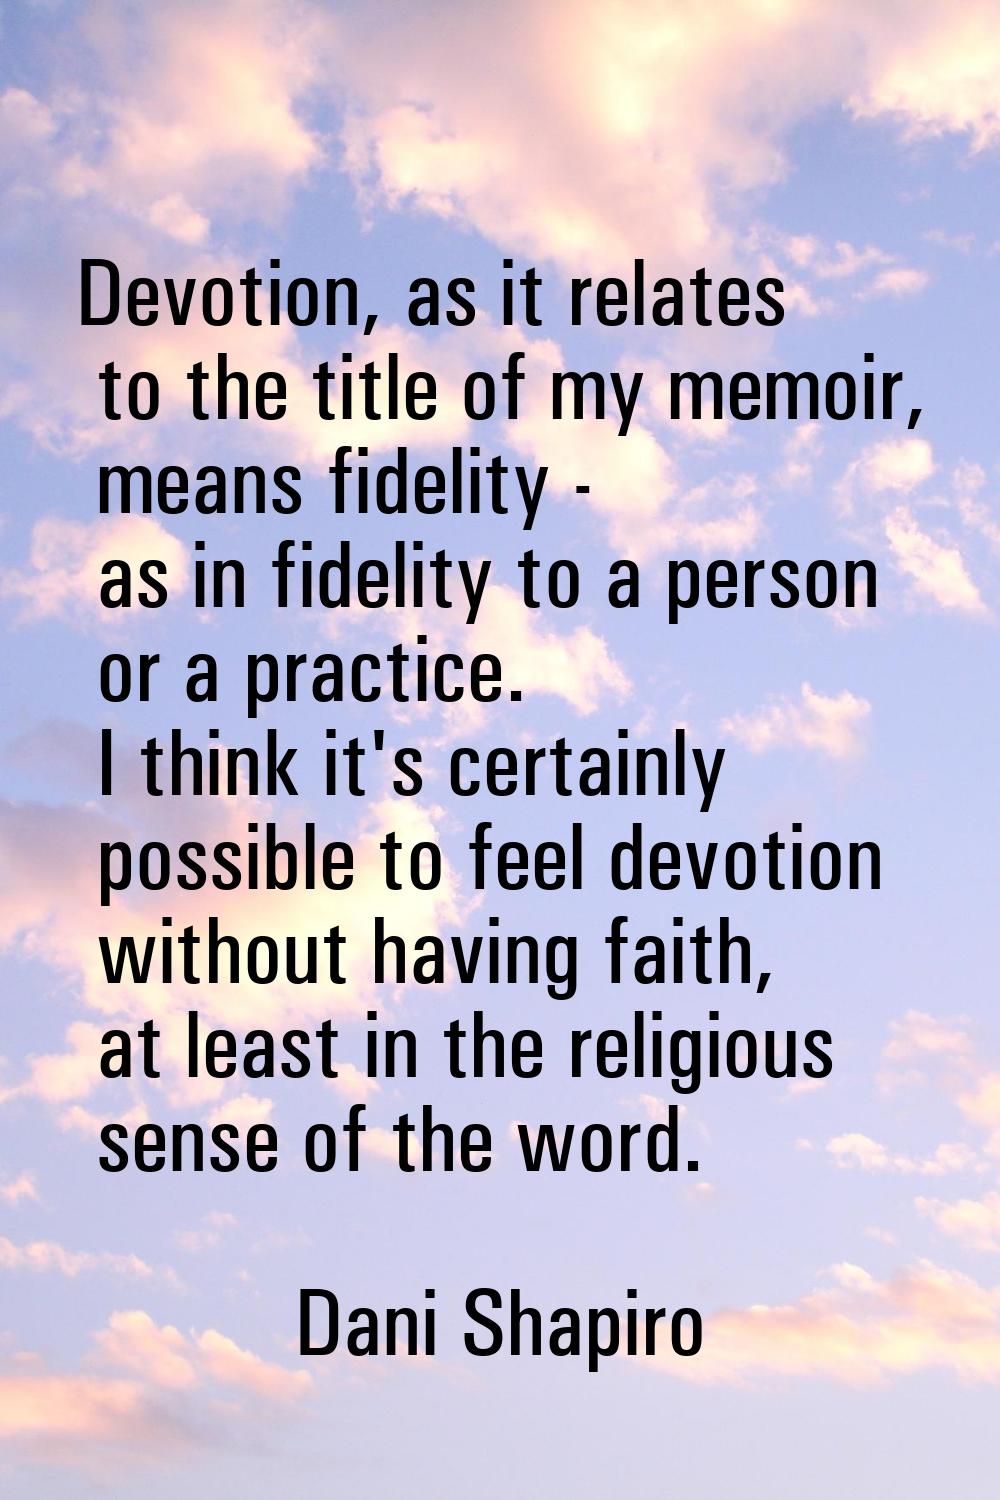 Devotion, as it relates to the title of my memoir, means fidelity - as in fidelity to a person or a